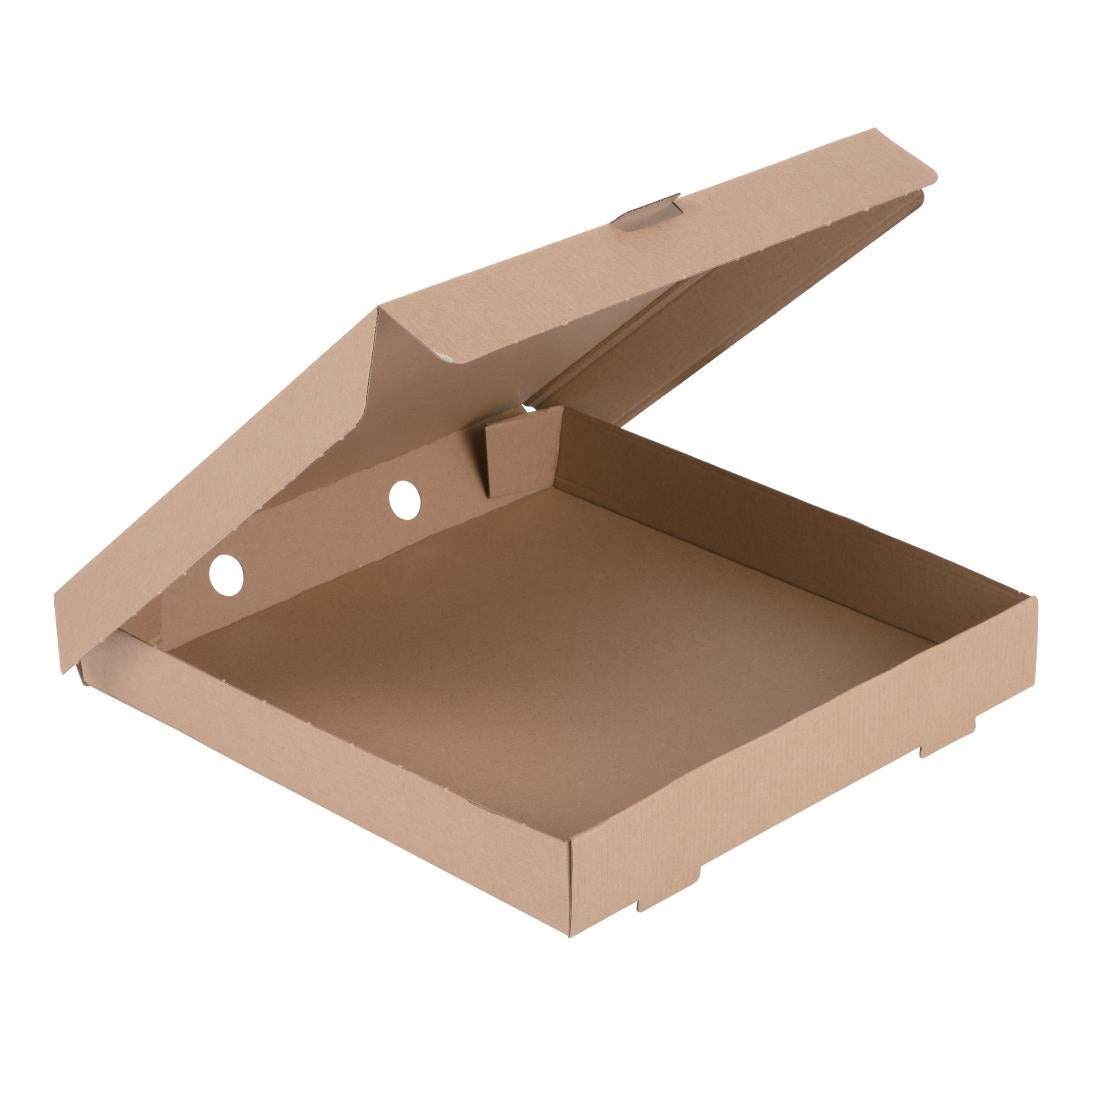 DC724 Fiesta Compostable Plain Pizza Boxes 12" (Pack of 100)